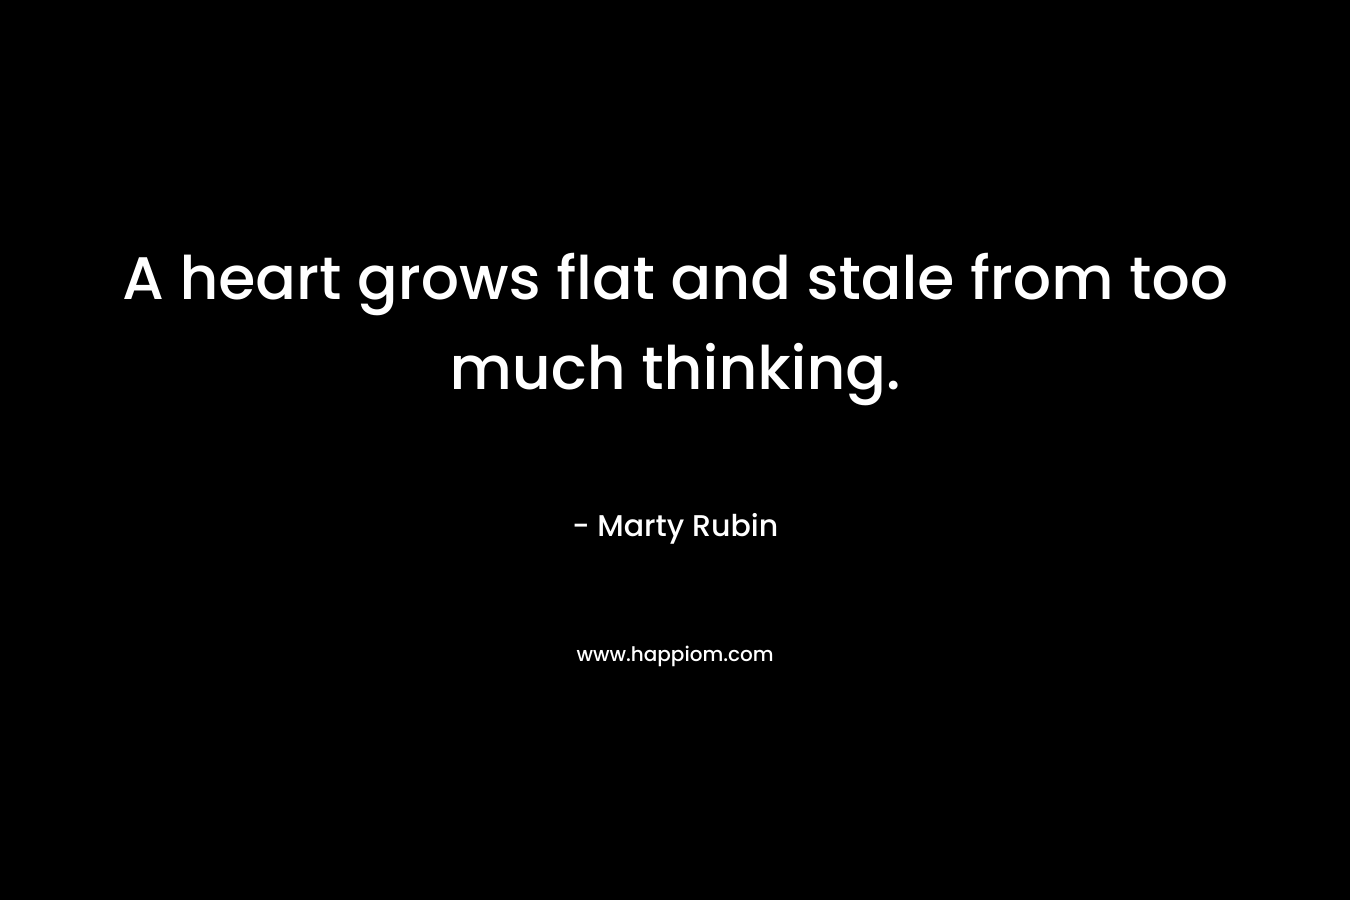 A heart grows flat and stale from too much thinking.